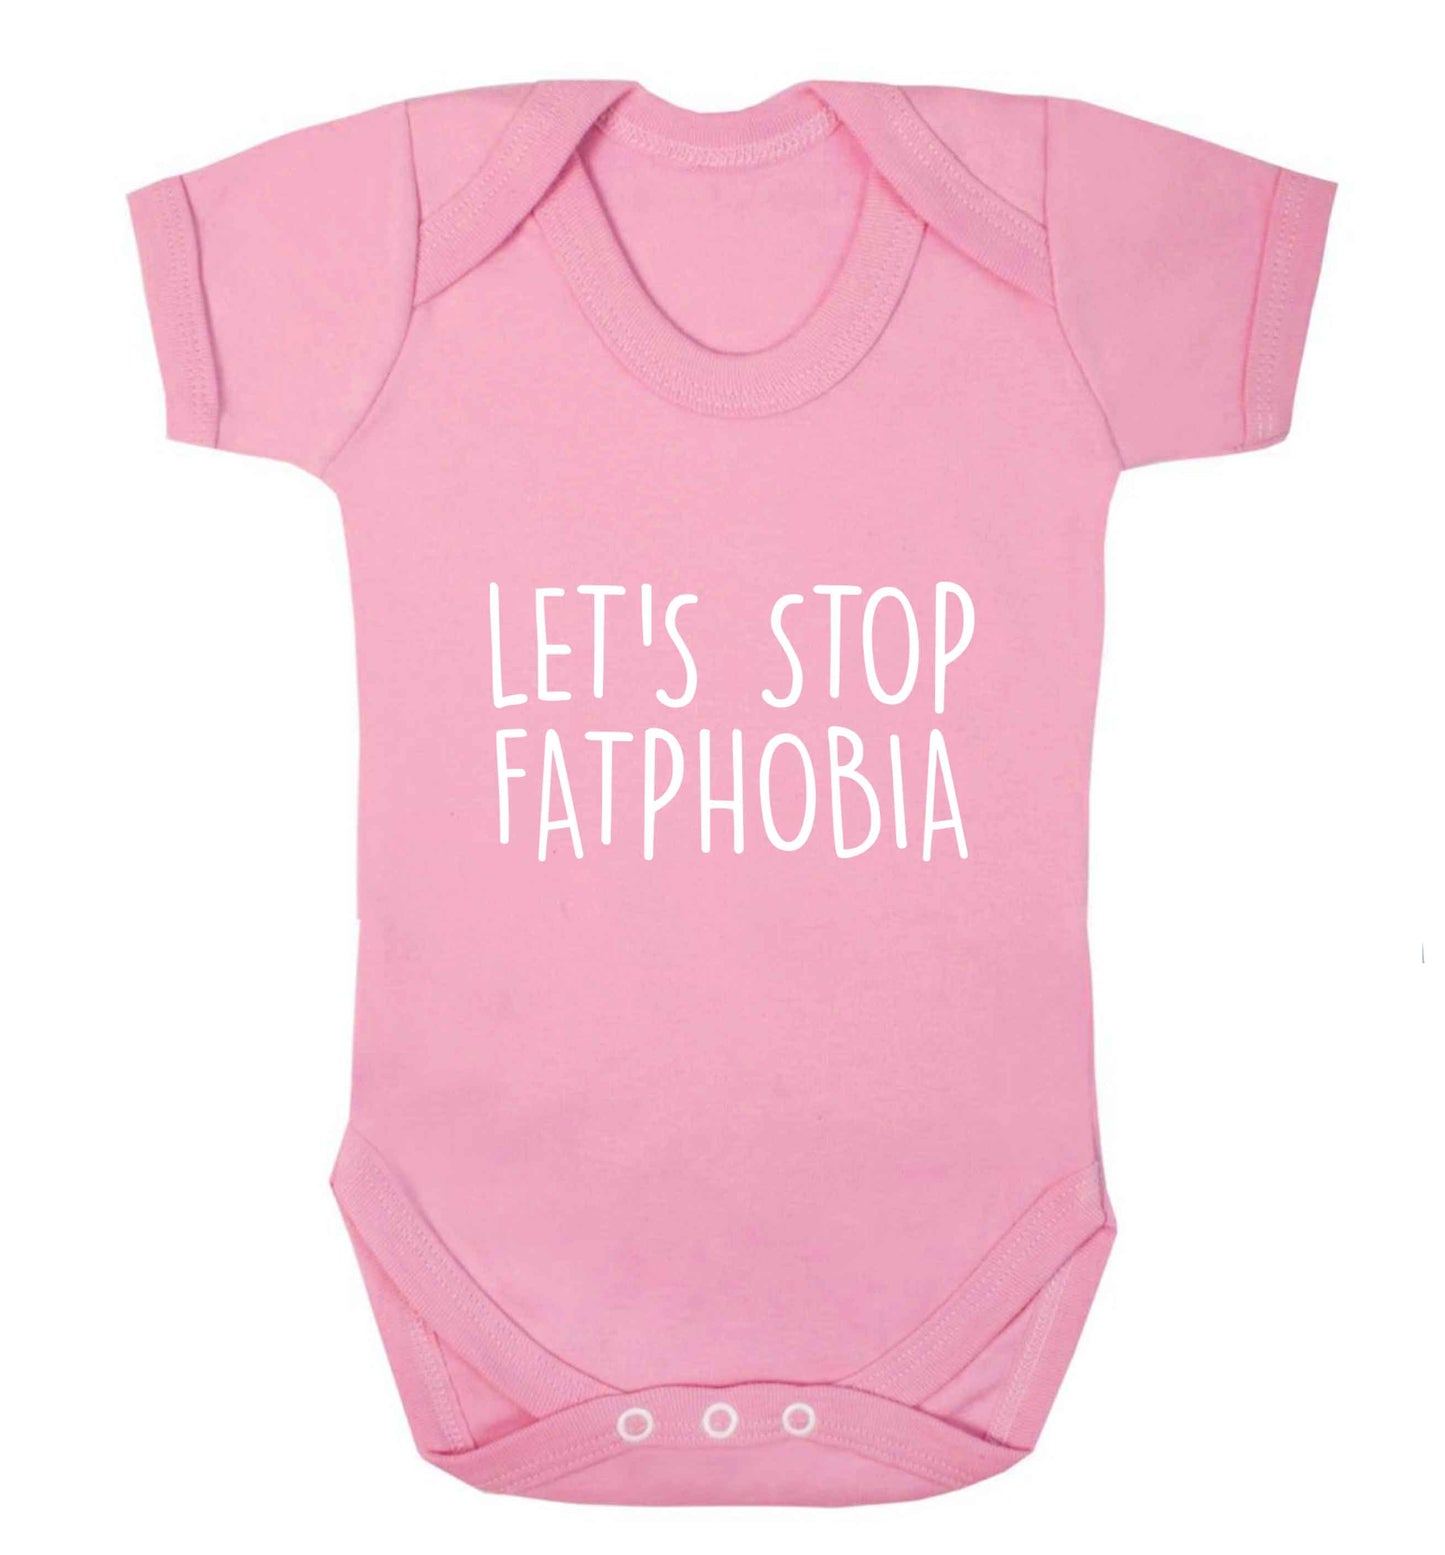 Let's stop fatphobia baby vest pale pink 18-24 months